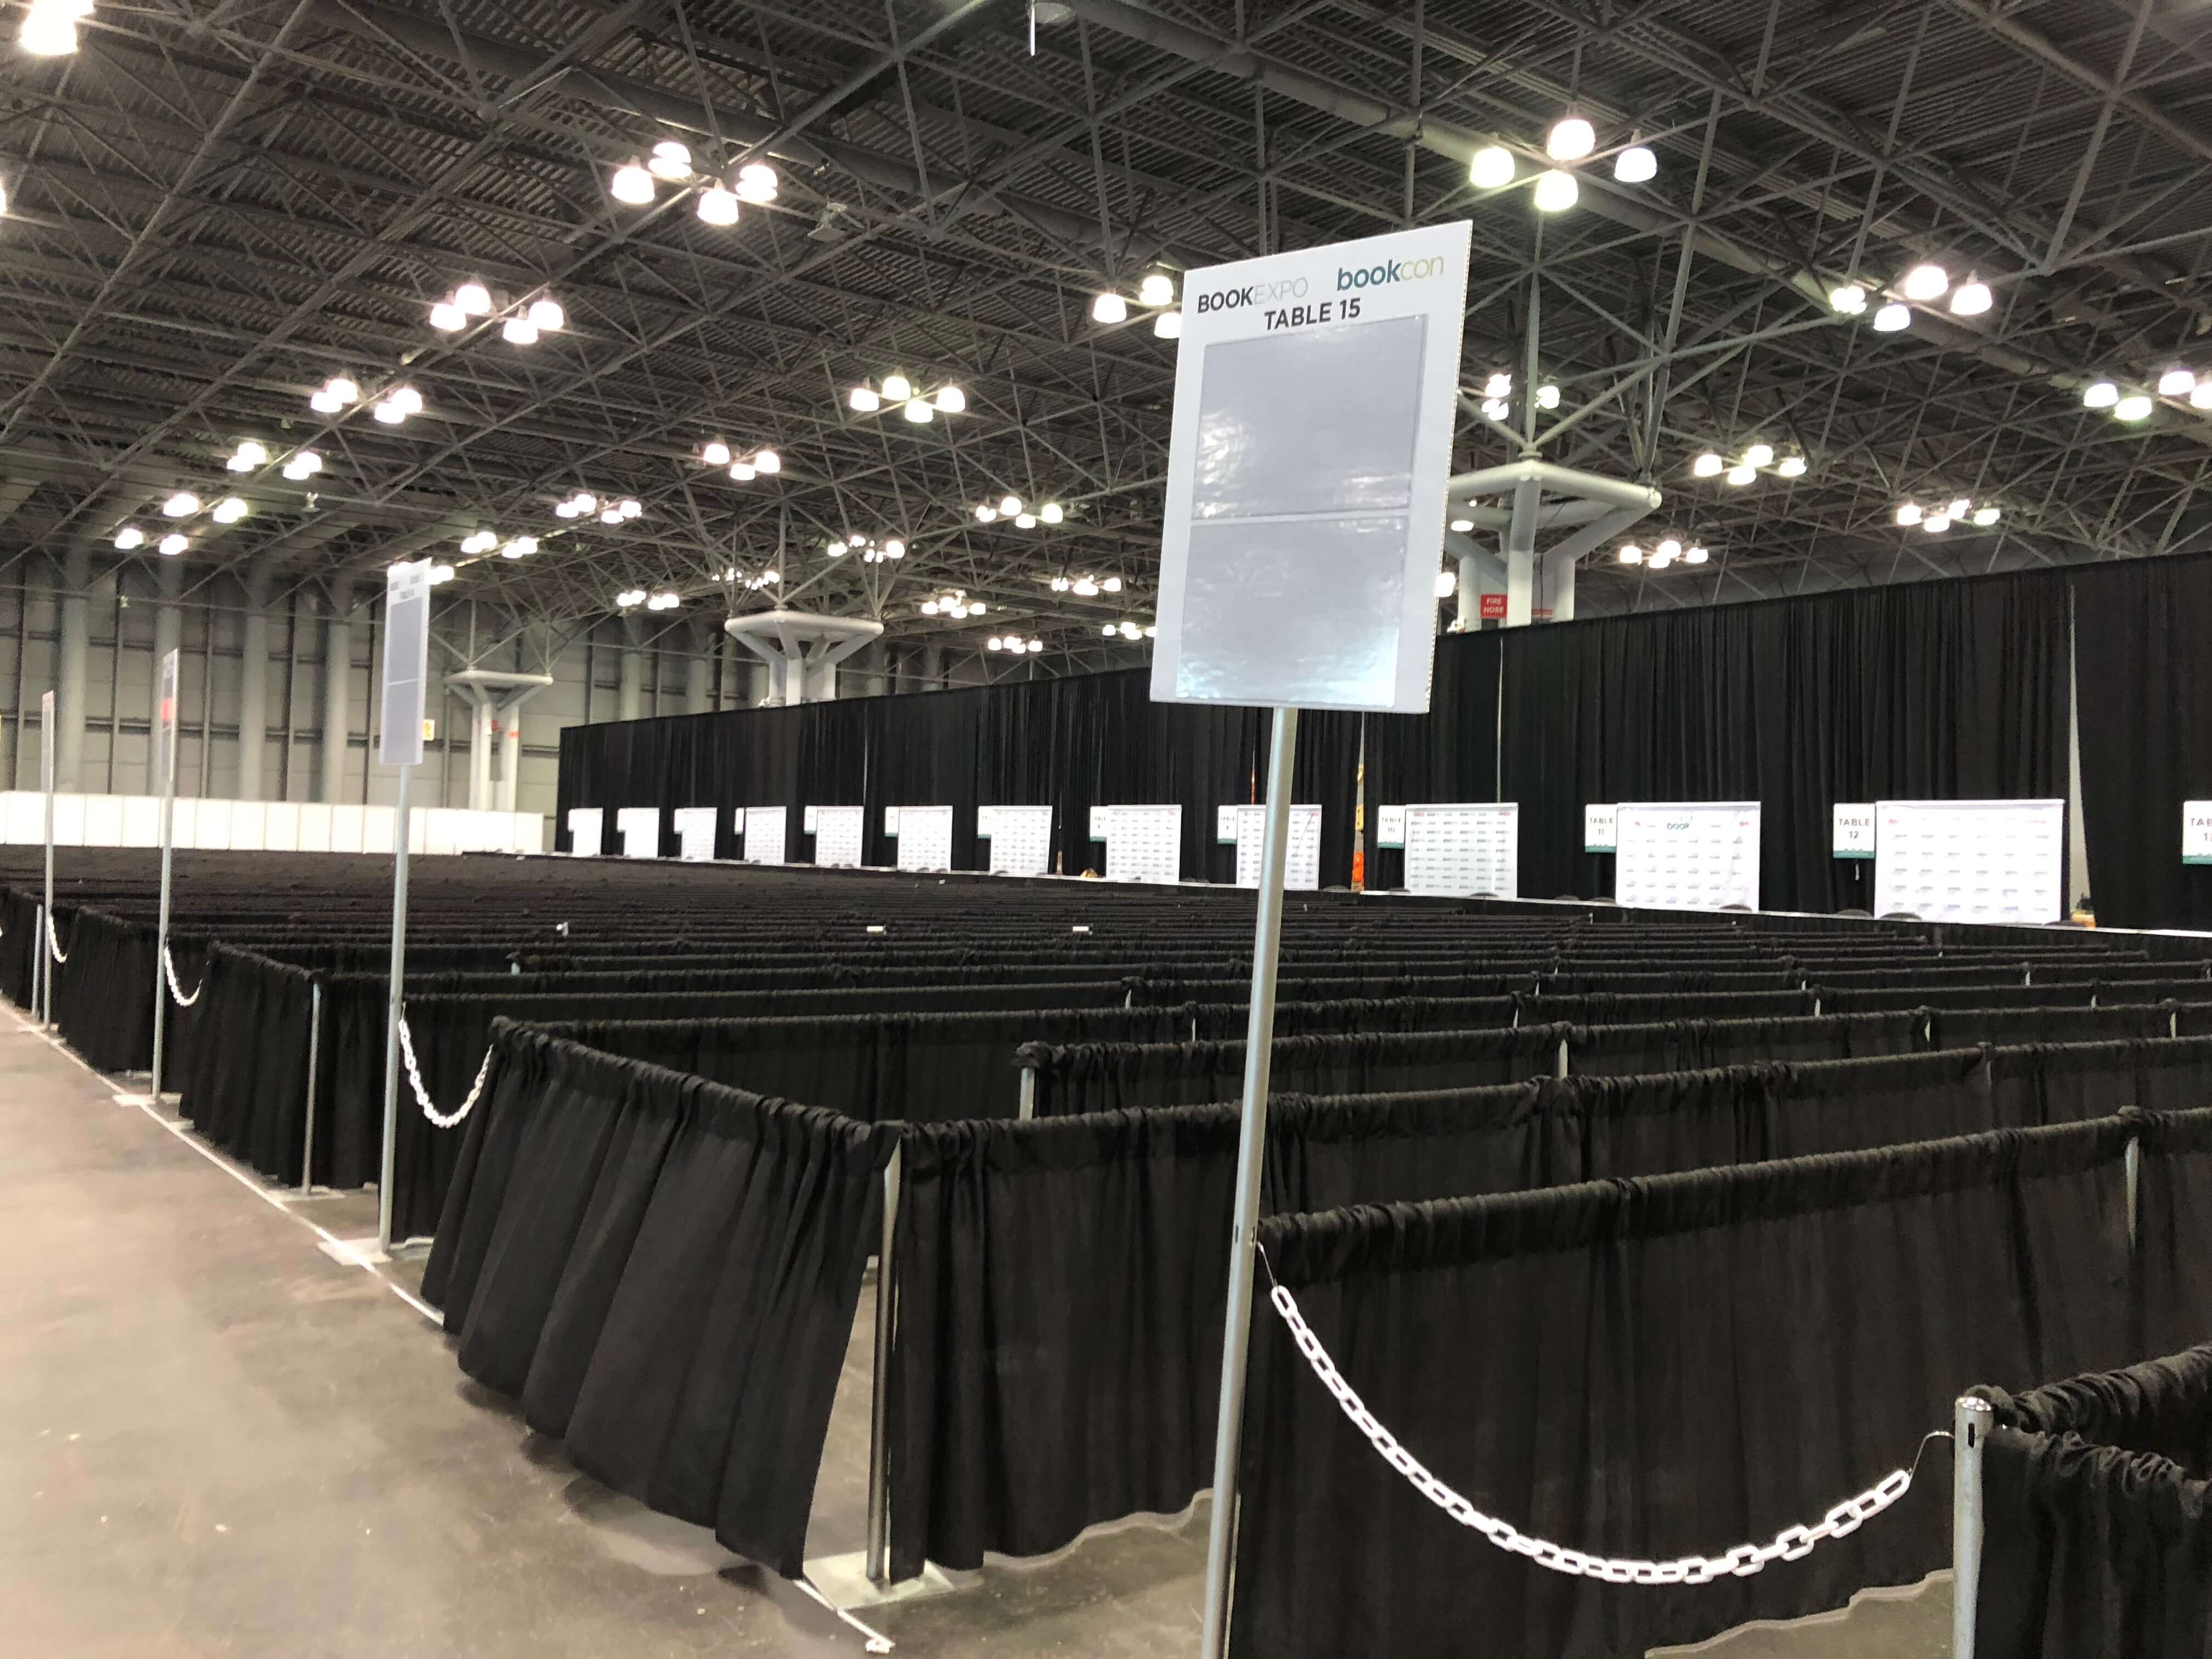 BookExpo18 before the start